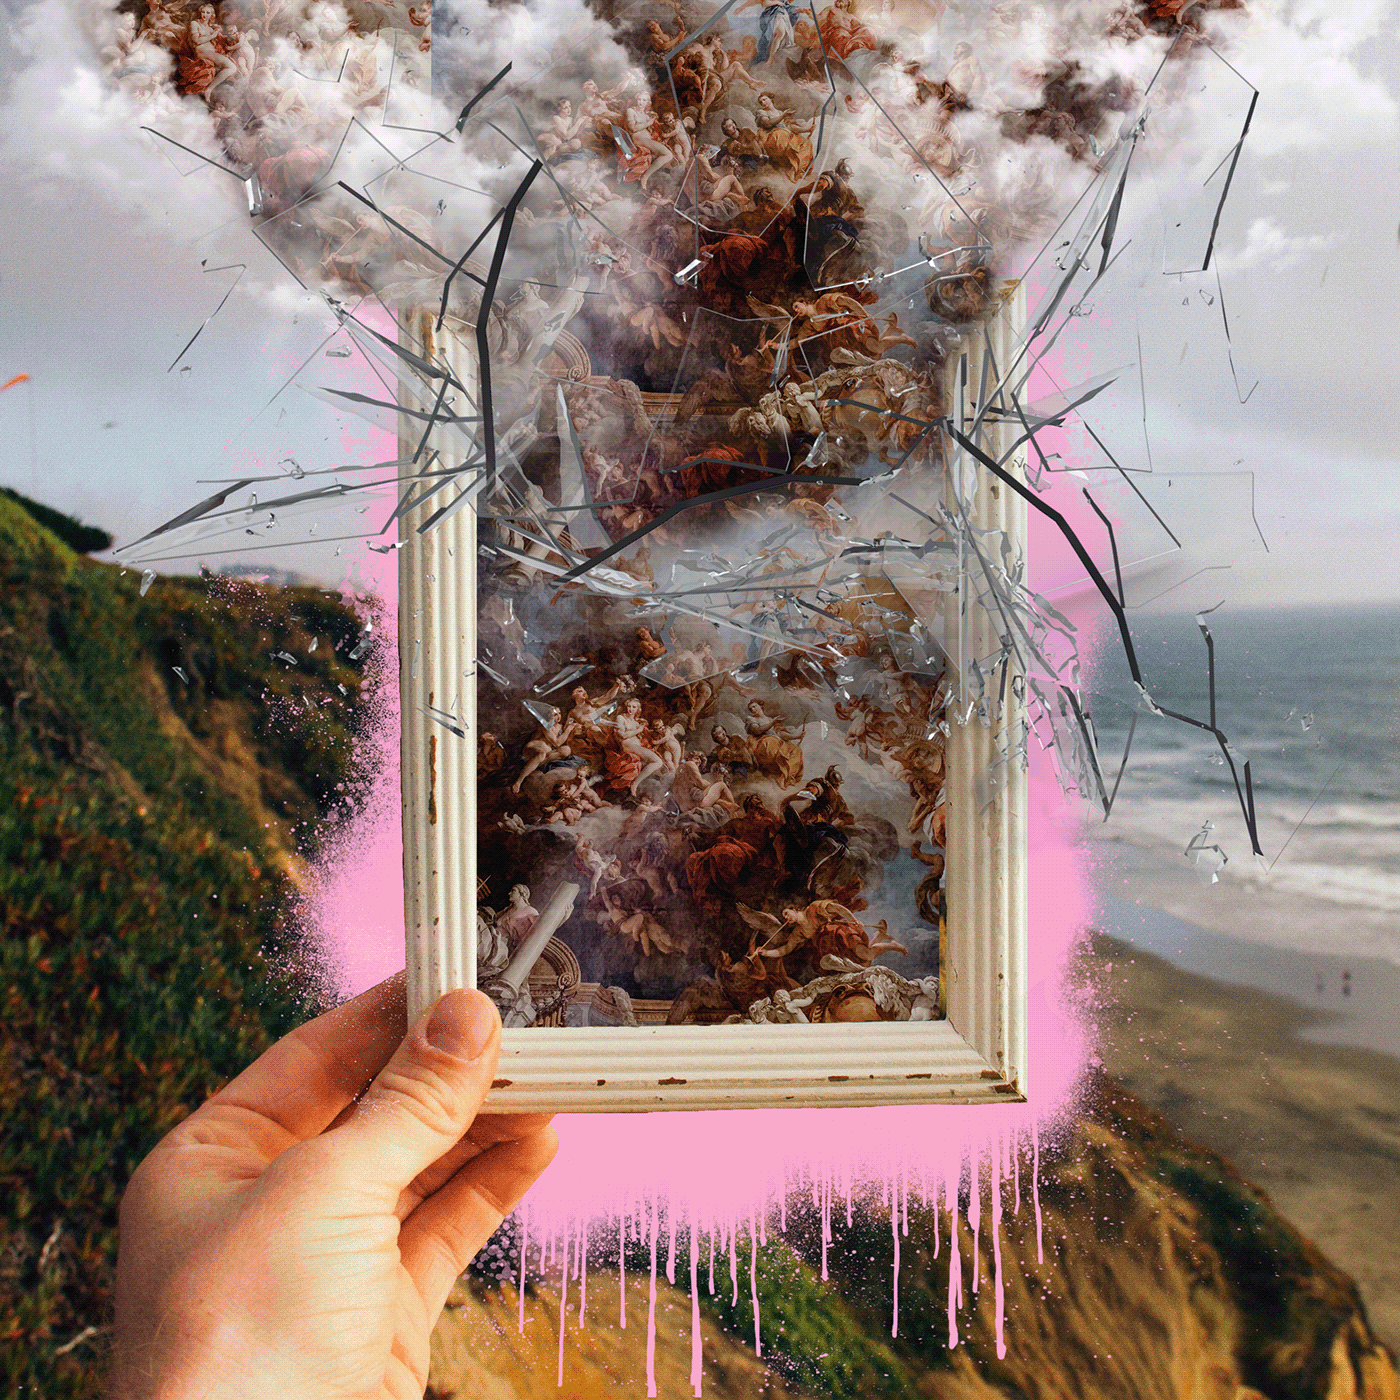 Avante Garde collage collage art daily experimental free ipad pro